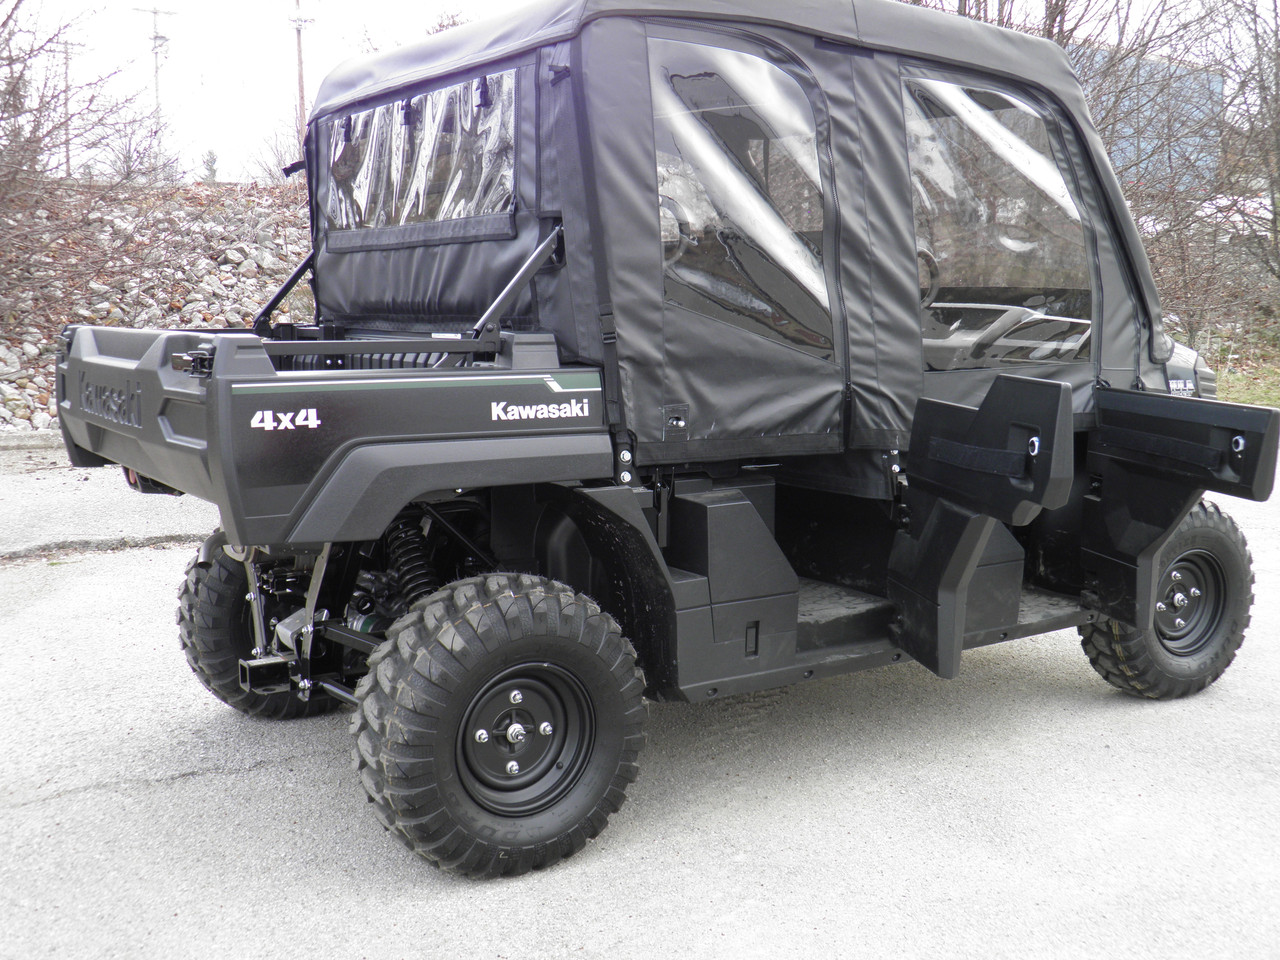 3 Star Kawasaki Mule Pro FXT DXT Full Cab Enclosure for Hard Windshield with Upper Doors